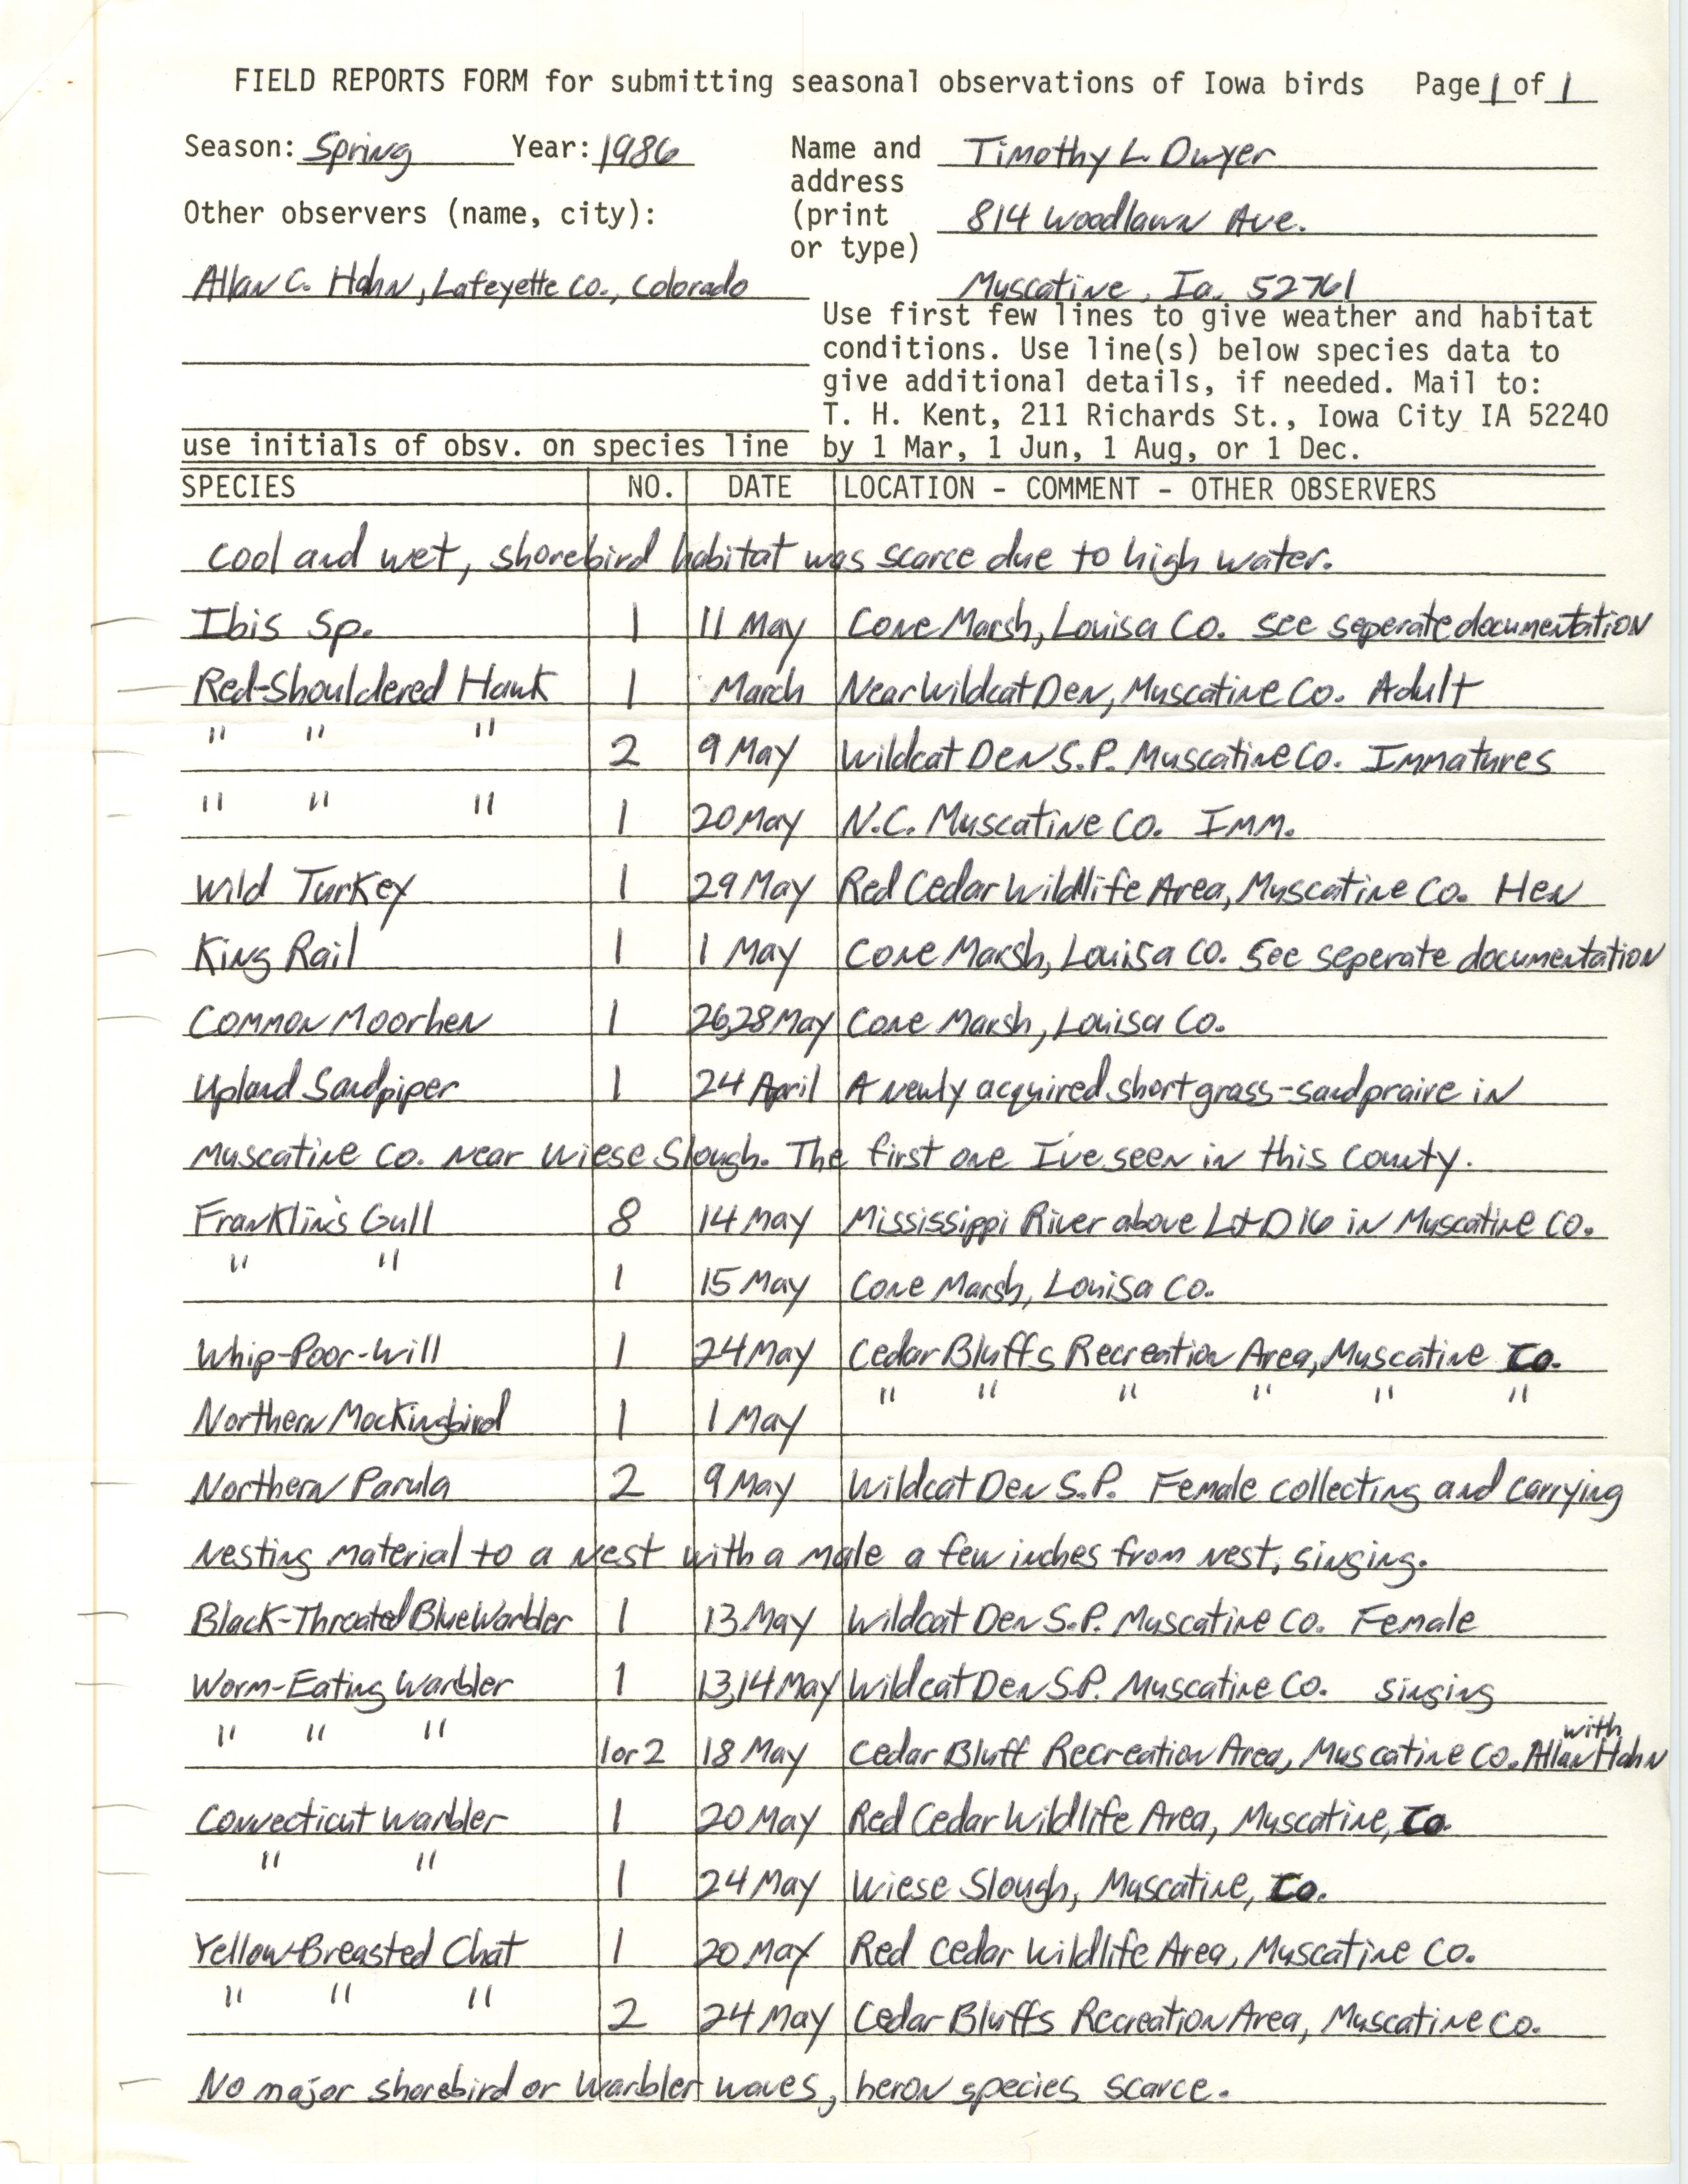 Field reports form for submitting seasonal observations of Iowa birds, Timothy Dwyer, Spring 1986